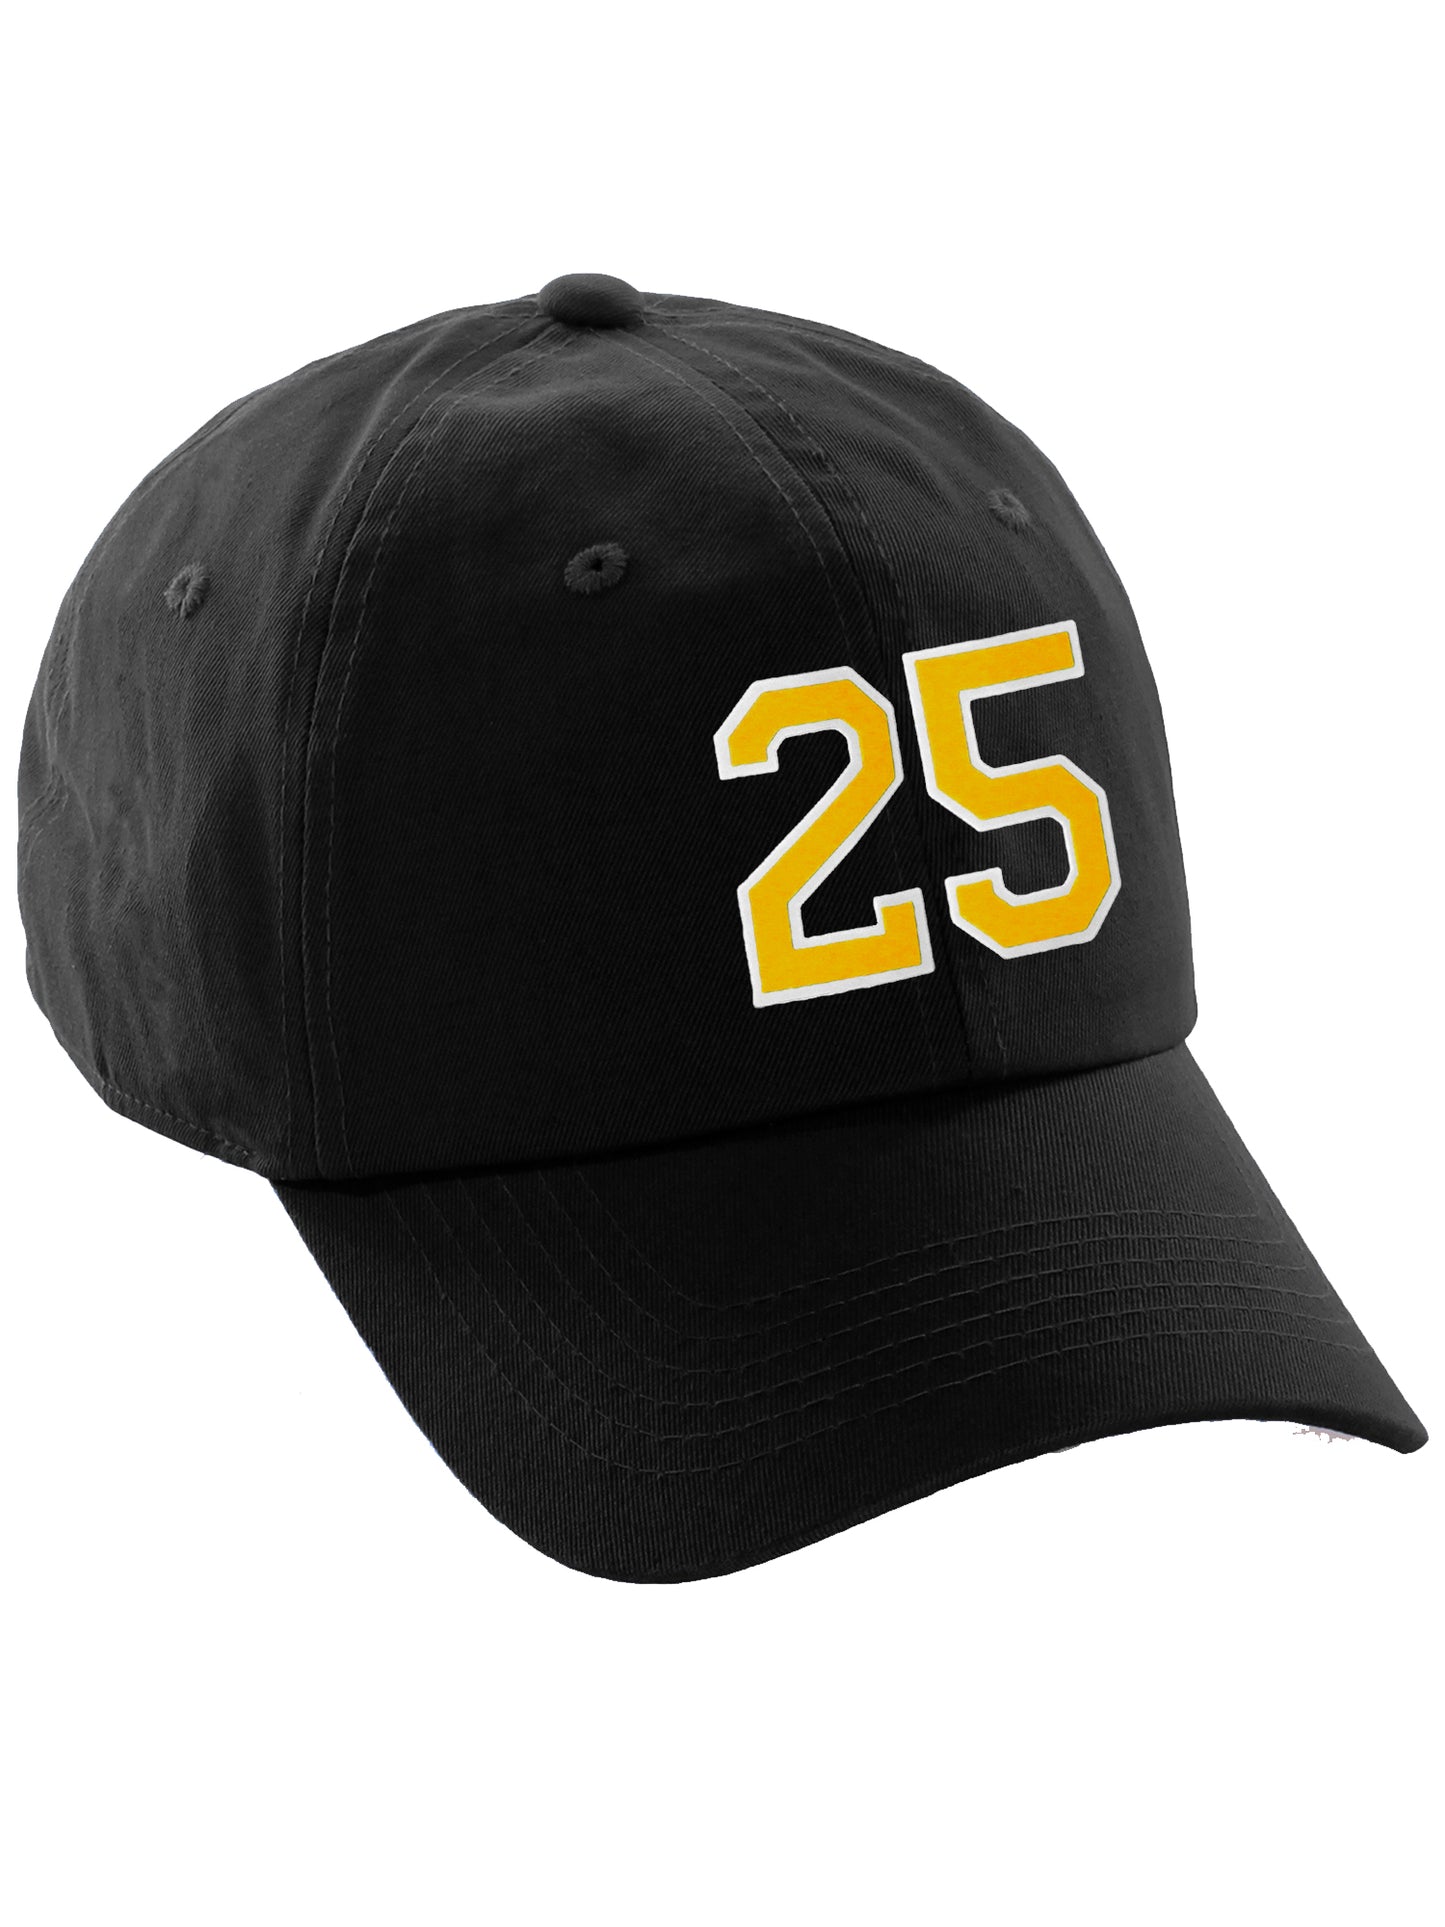 I&W Hatgear Customized Number Hat 00 to 99 Team Colors Baseball Cap, Black Hat White Gold